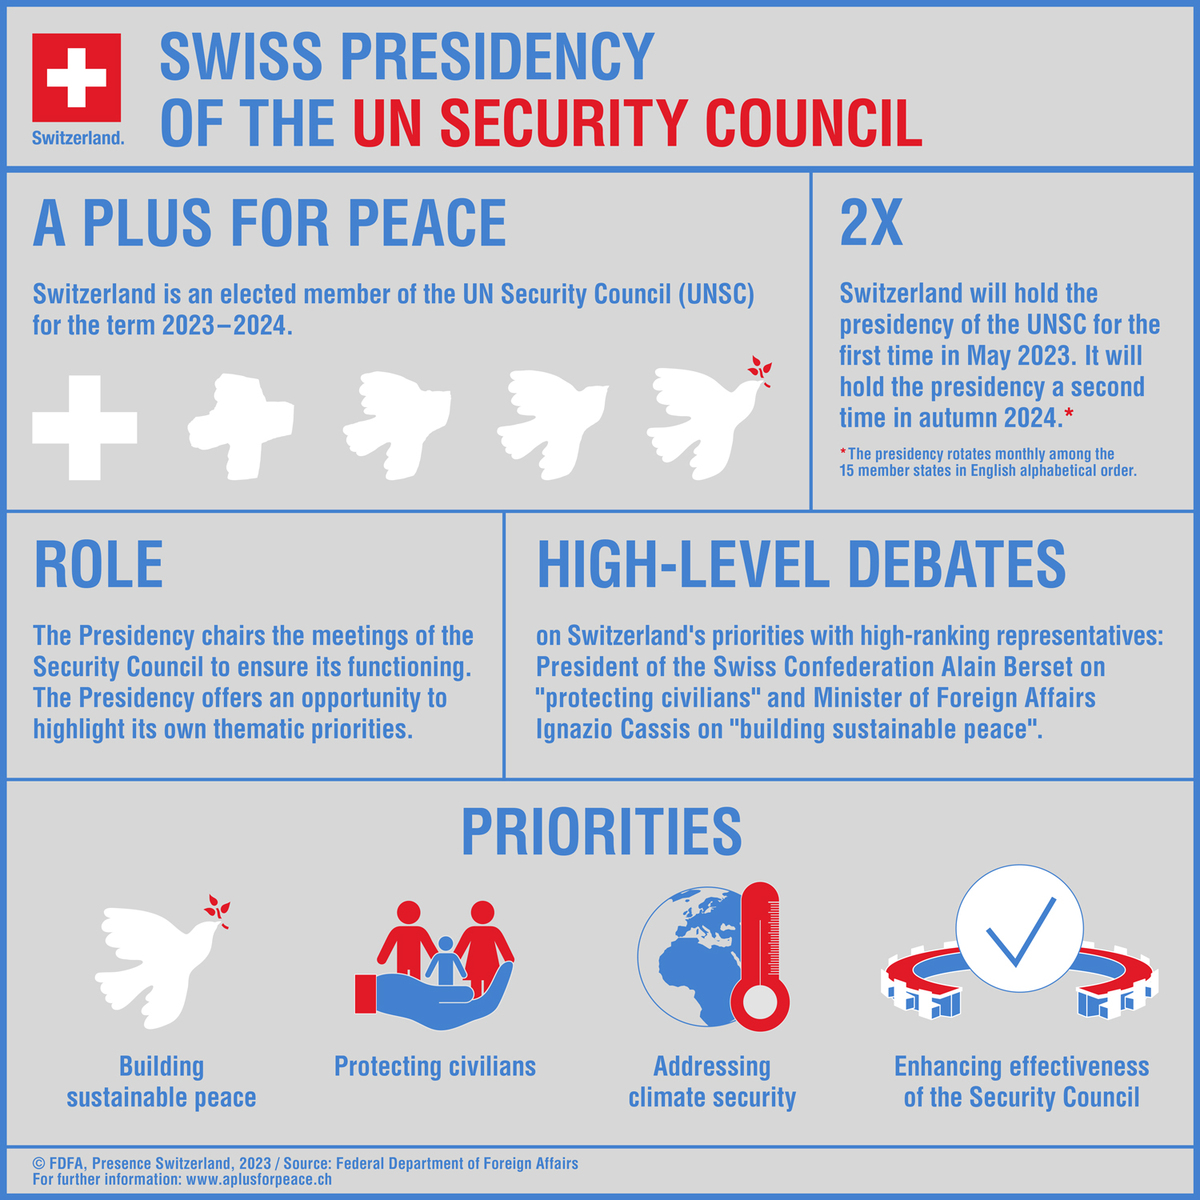 Did you know that Switzerland 🇨🇭 assumes the presidency of the UN Security Council 🇺🇳 for the first time in May 2023?
#APlusForPeace #SwitzerlandUNSC 
Learn more about the Swiss presidency in our infographic 👇